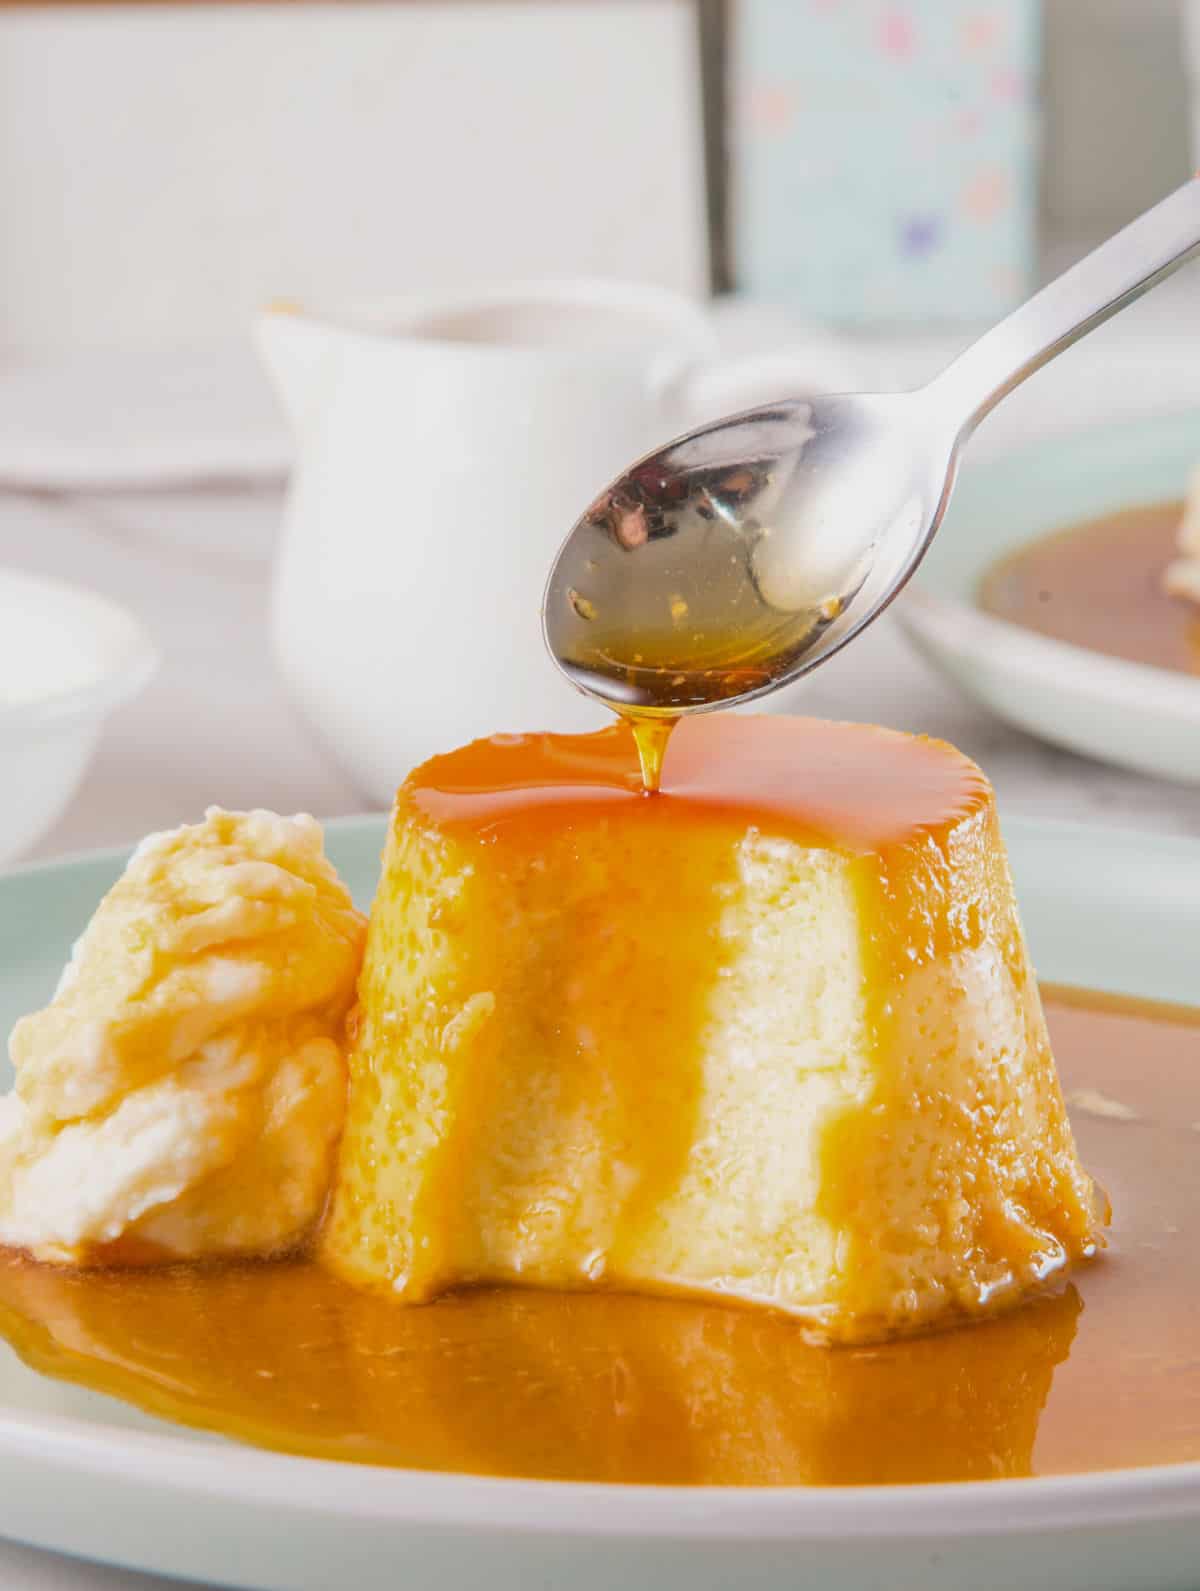 Half eaten flan serving with caramel and cream on a plate.